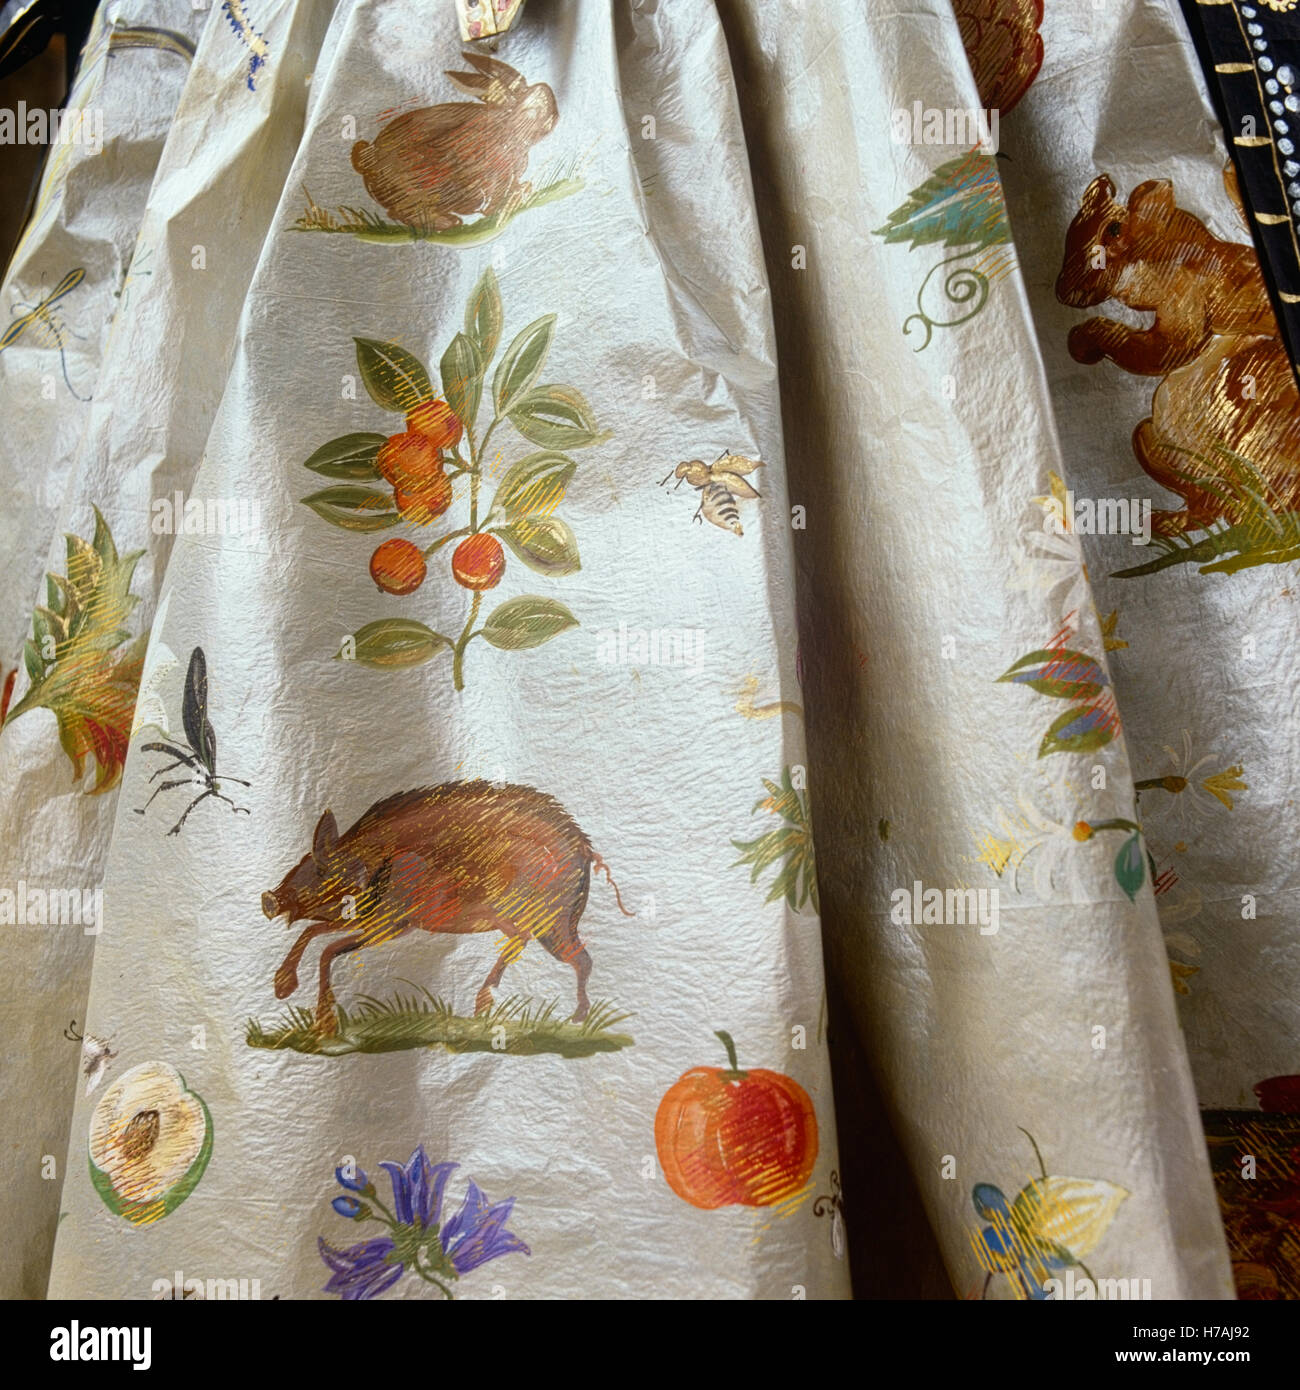 Hand-painted animals and fruit on skirt of historical replica paper dress by Isabelle de Borchgrave Stock Photo